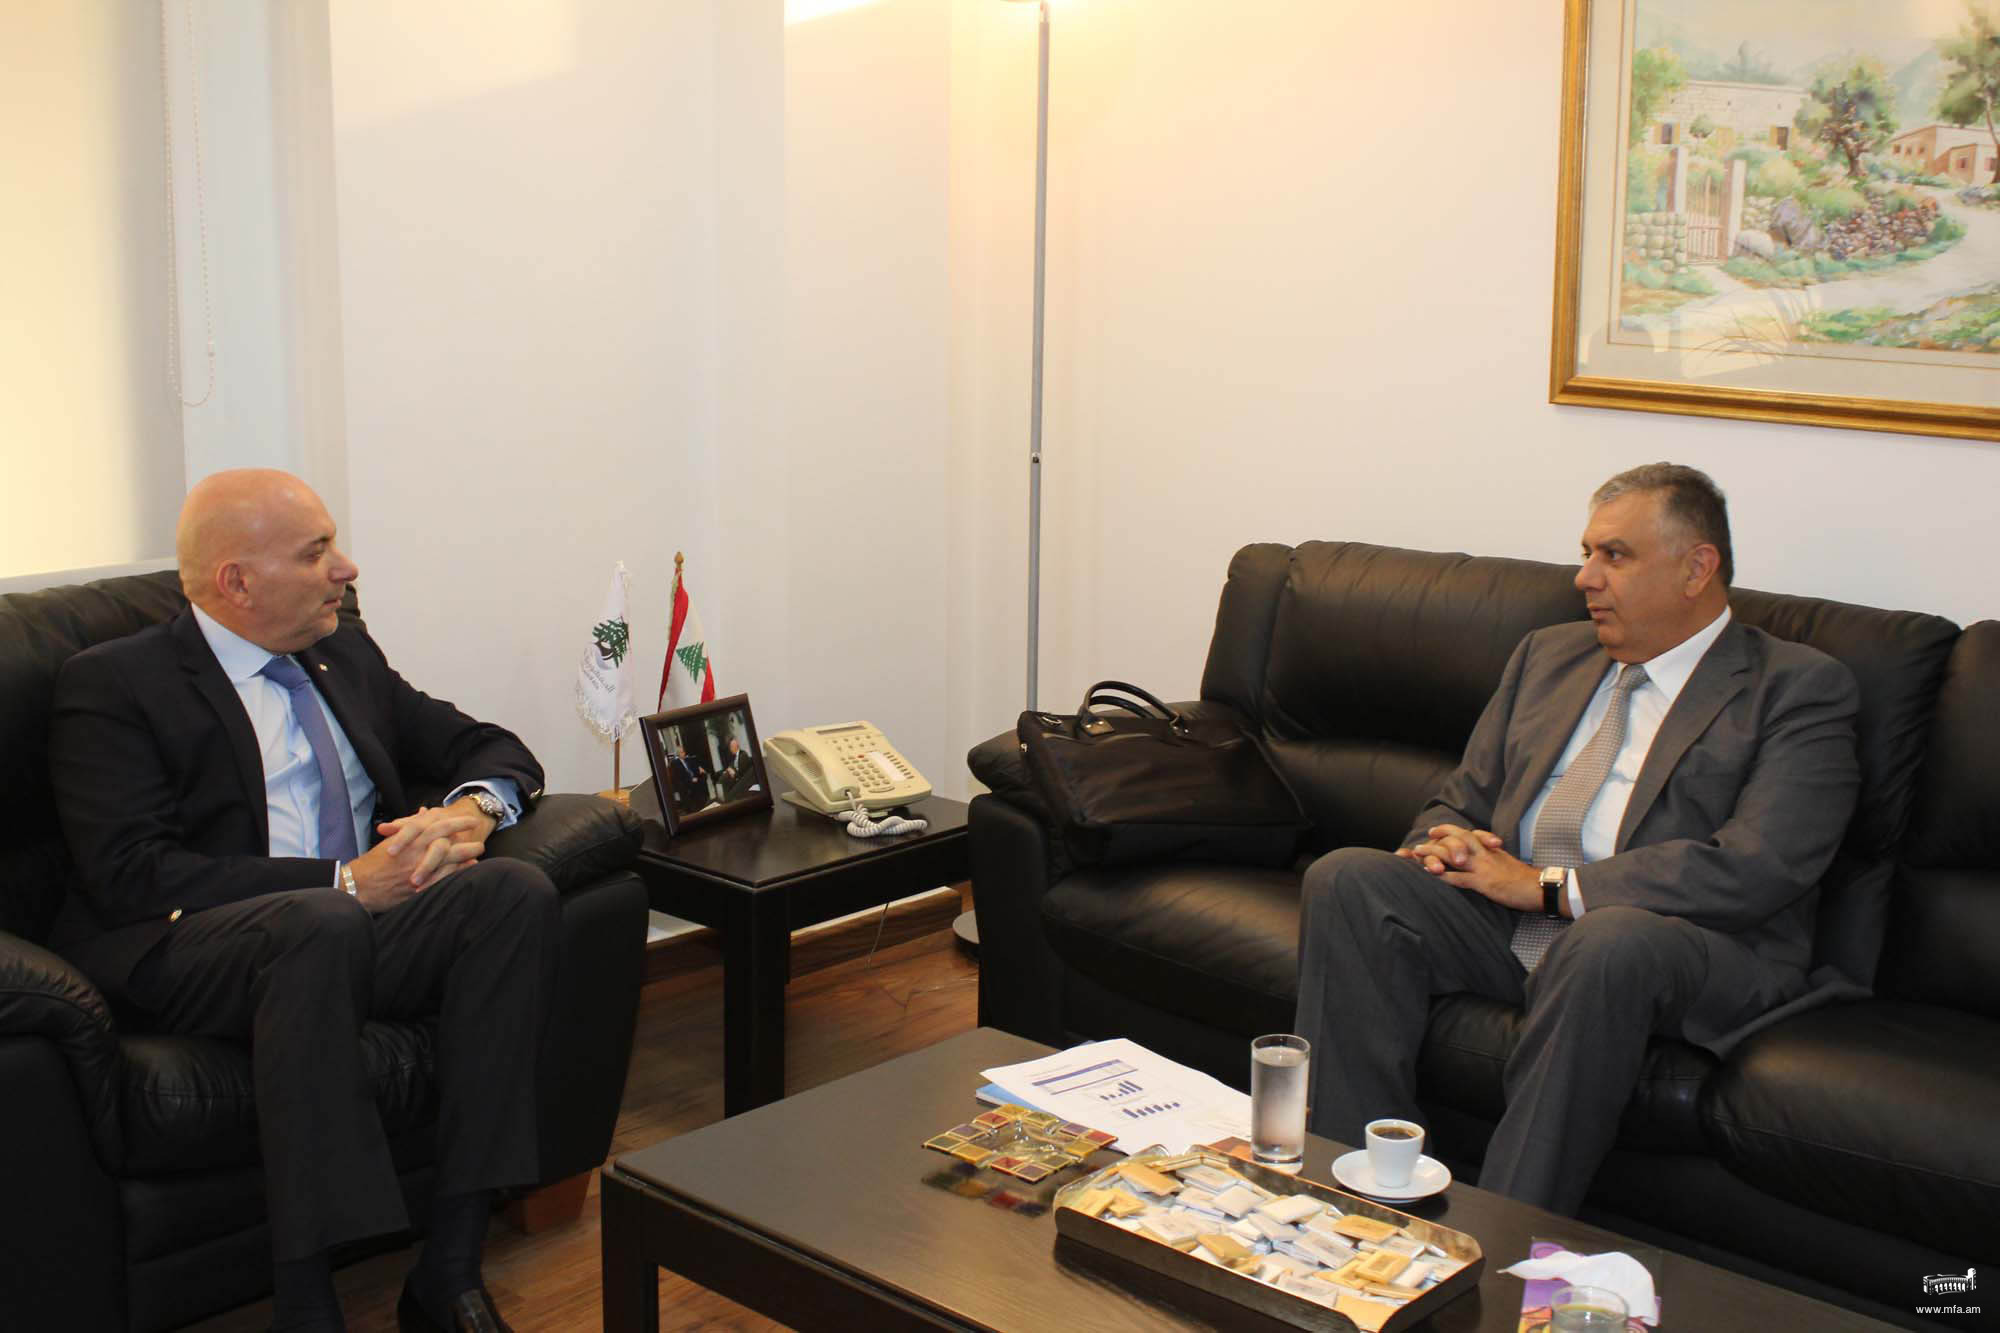 Ambassador Kocharian met with Lebanese Minister of Economy and Trade